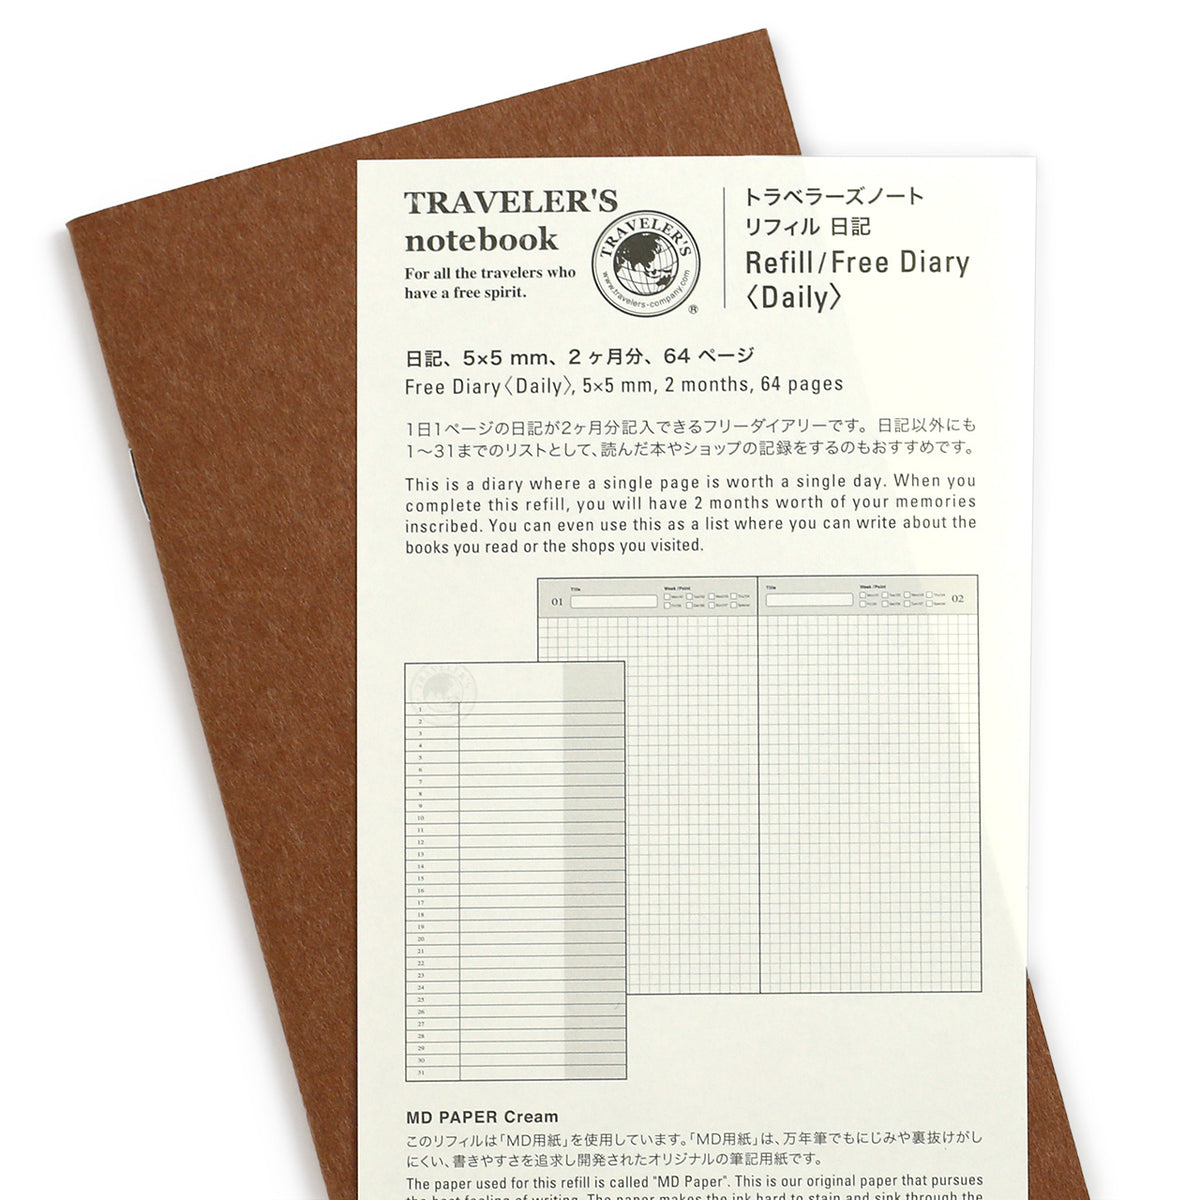 005 Refill information sheet , MD Paper, showing the Free Diary (no date) pages with some grid and some lined 5x5mm, 2 months, 64 pages, MD paper cream